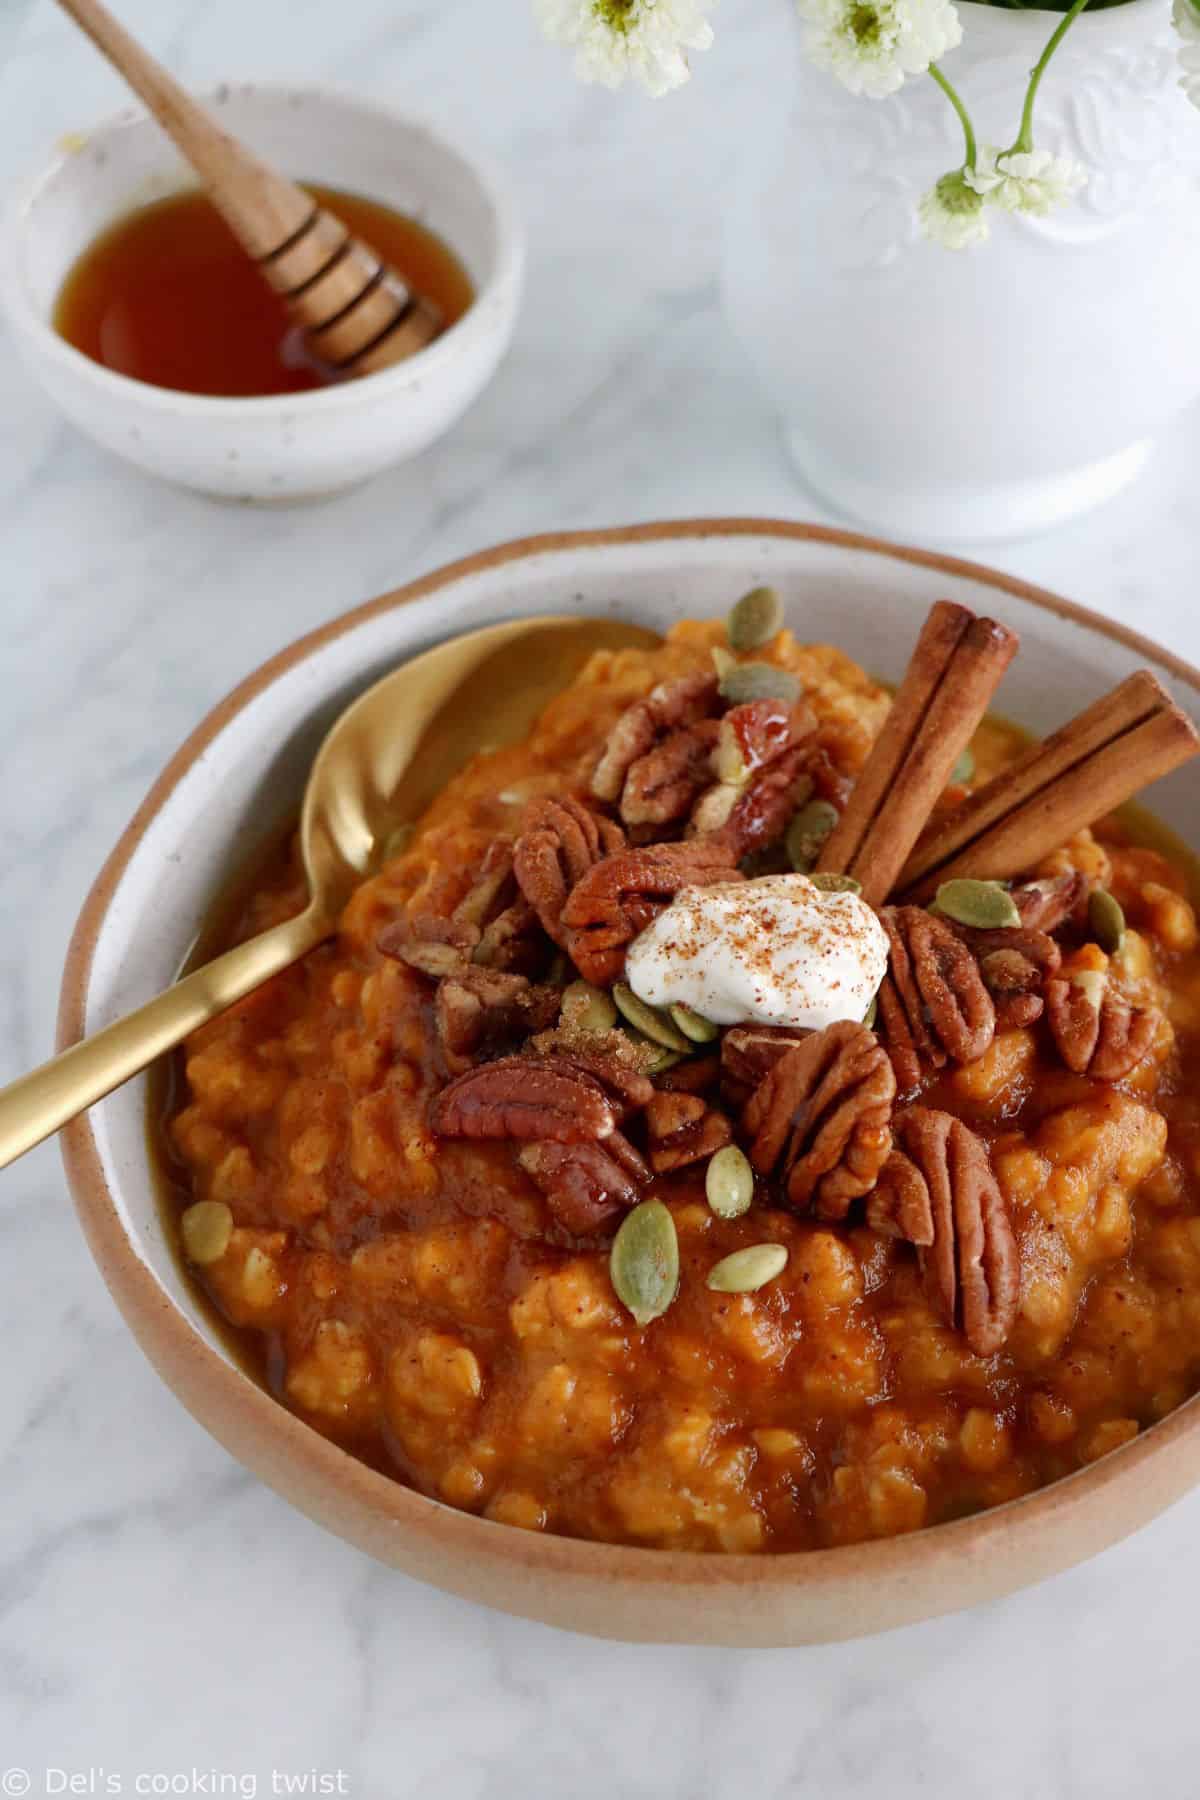 This easy pumpkin oatmeal is like having pumpkin pie for breakfast! Prepared with real pumpkin puree, warm spices and oats, this oatmeal is ready in 5 minutes and makes a cozy and healthy breakfast recipe.